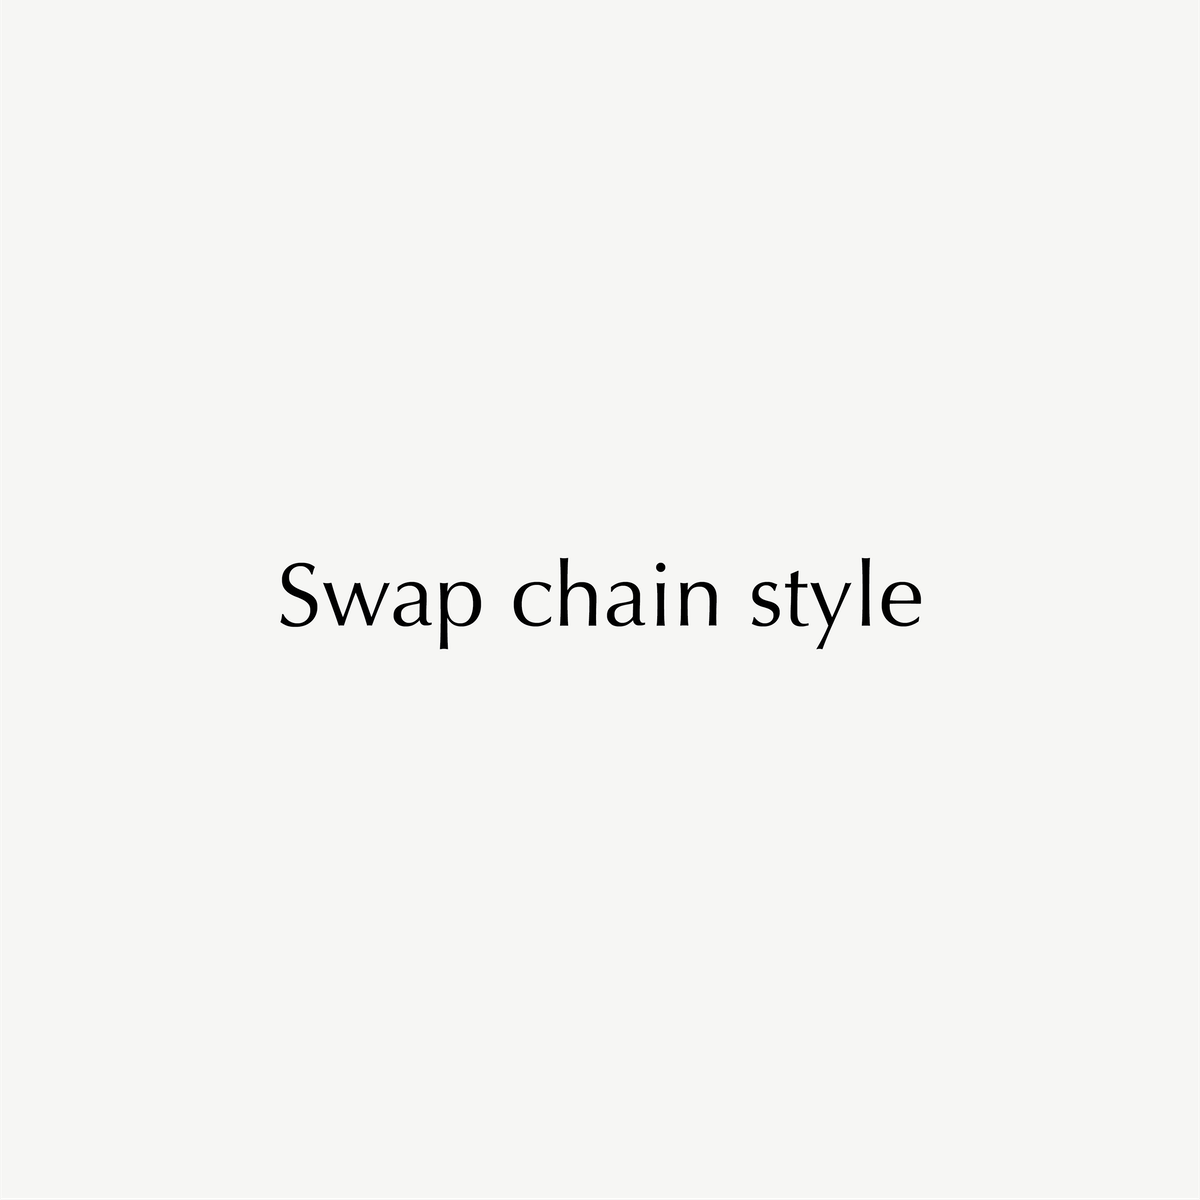 'Swap chain style' text